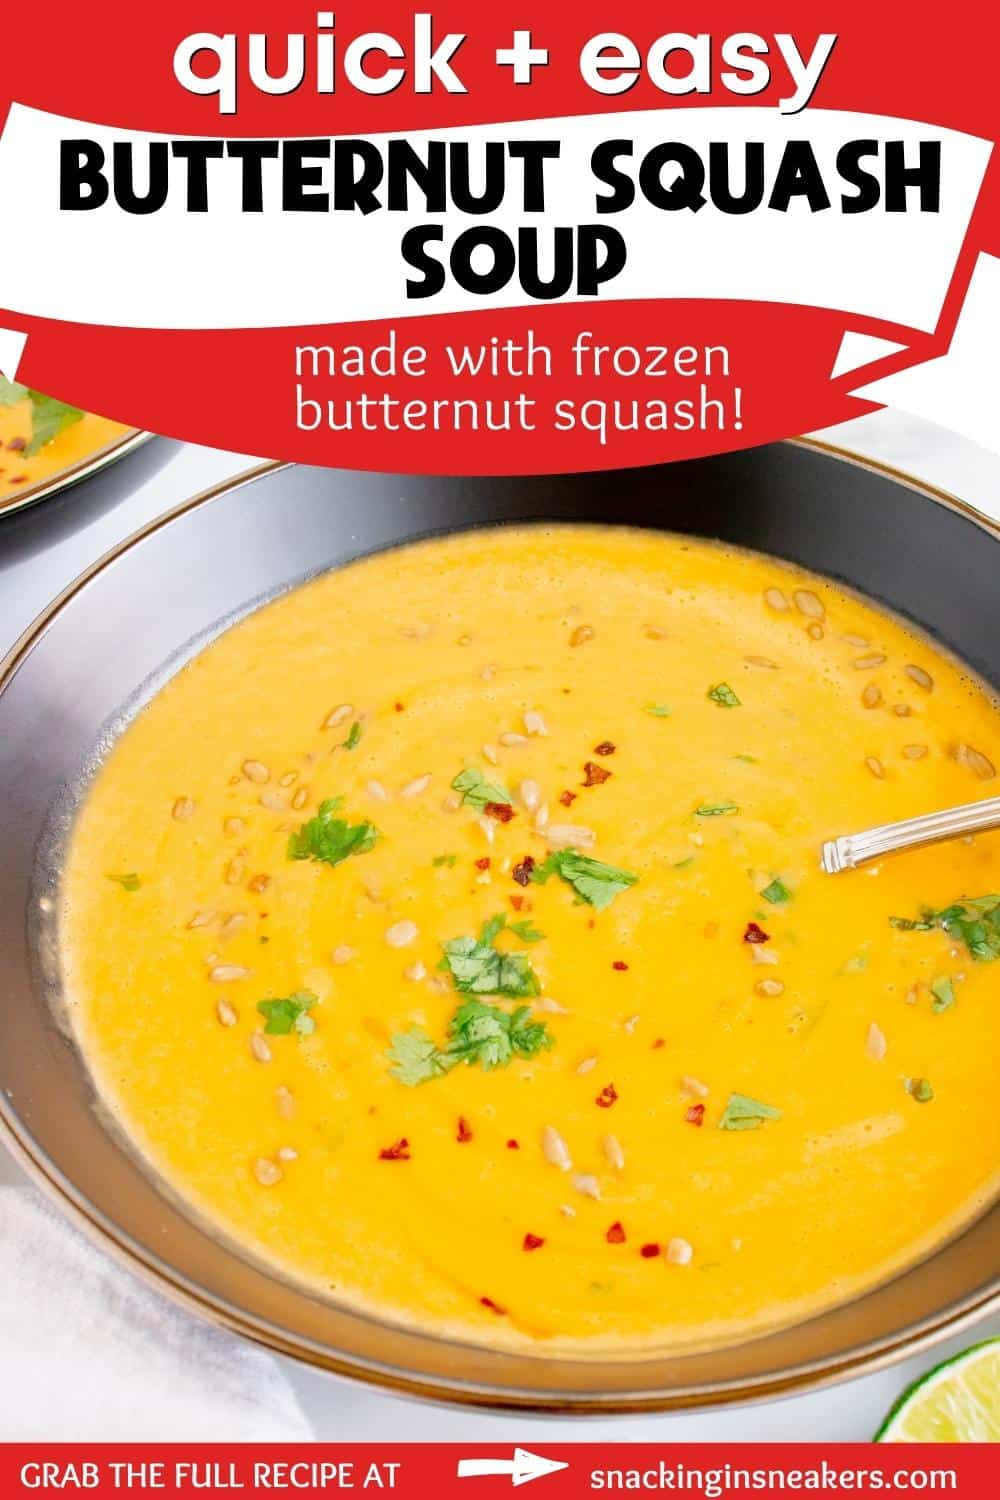 A bowl of frozen butternut squash soup with a spoon in it and a text overlay with the name of the recipe.